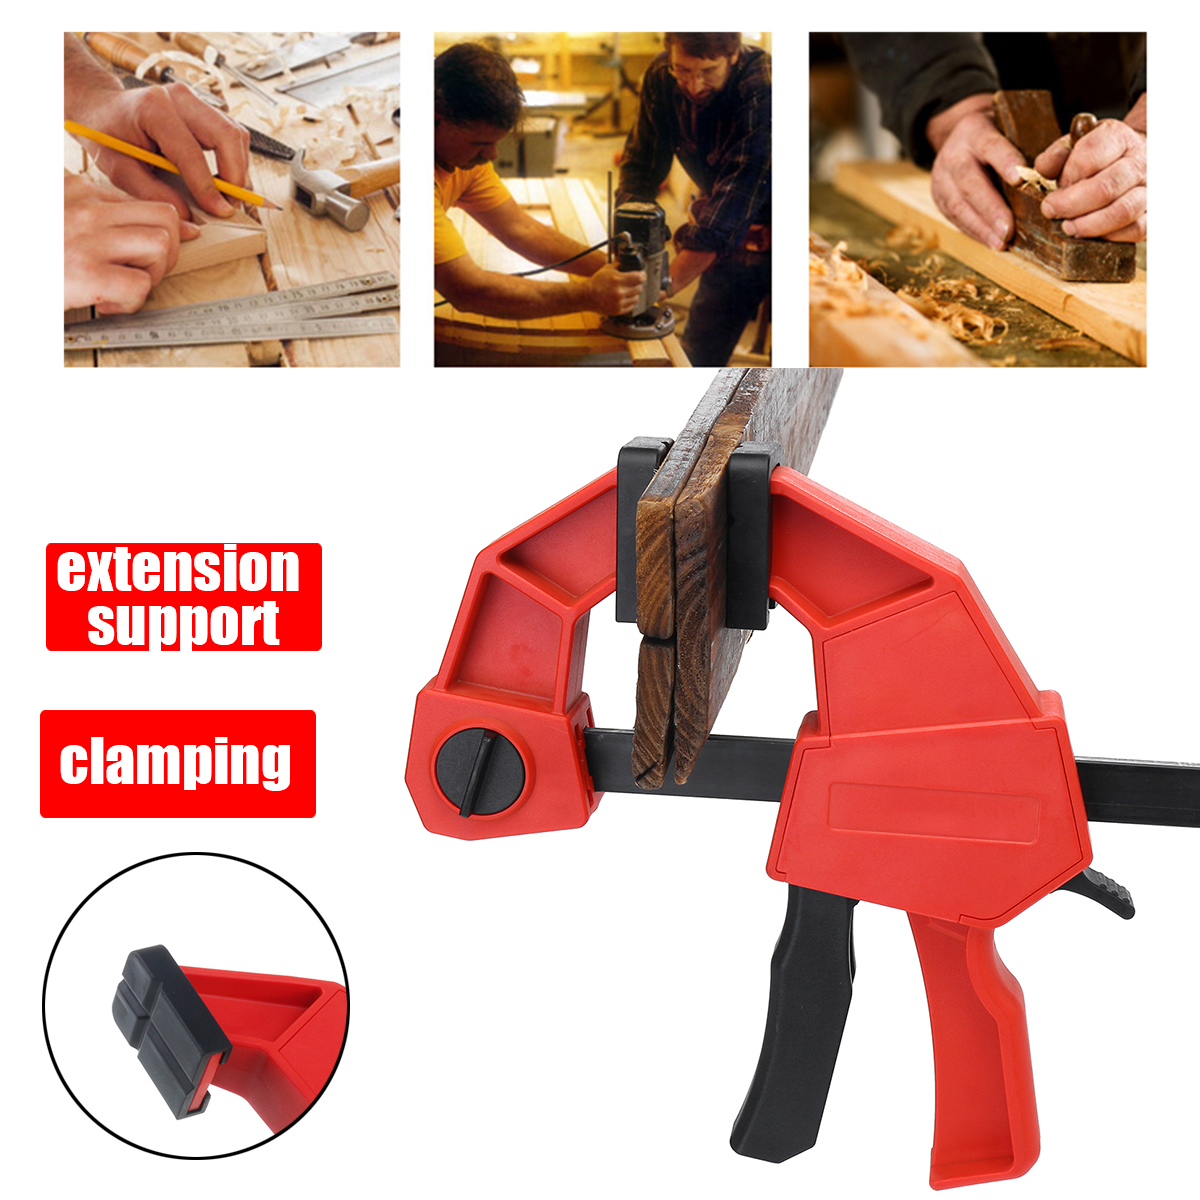 3036Inch-Heavy-Duty-F-Clamp-WoodWorking-Quick-Grip-Bar-Plastic-Grip-Wood-Clamp-1630185-2